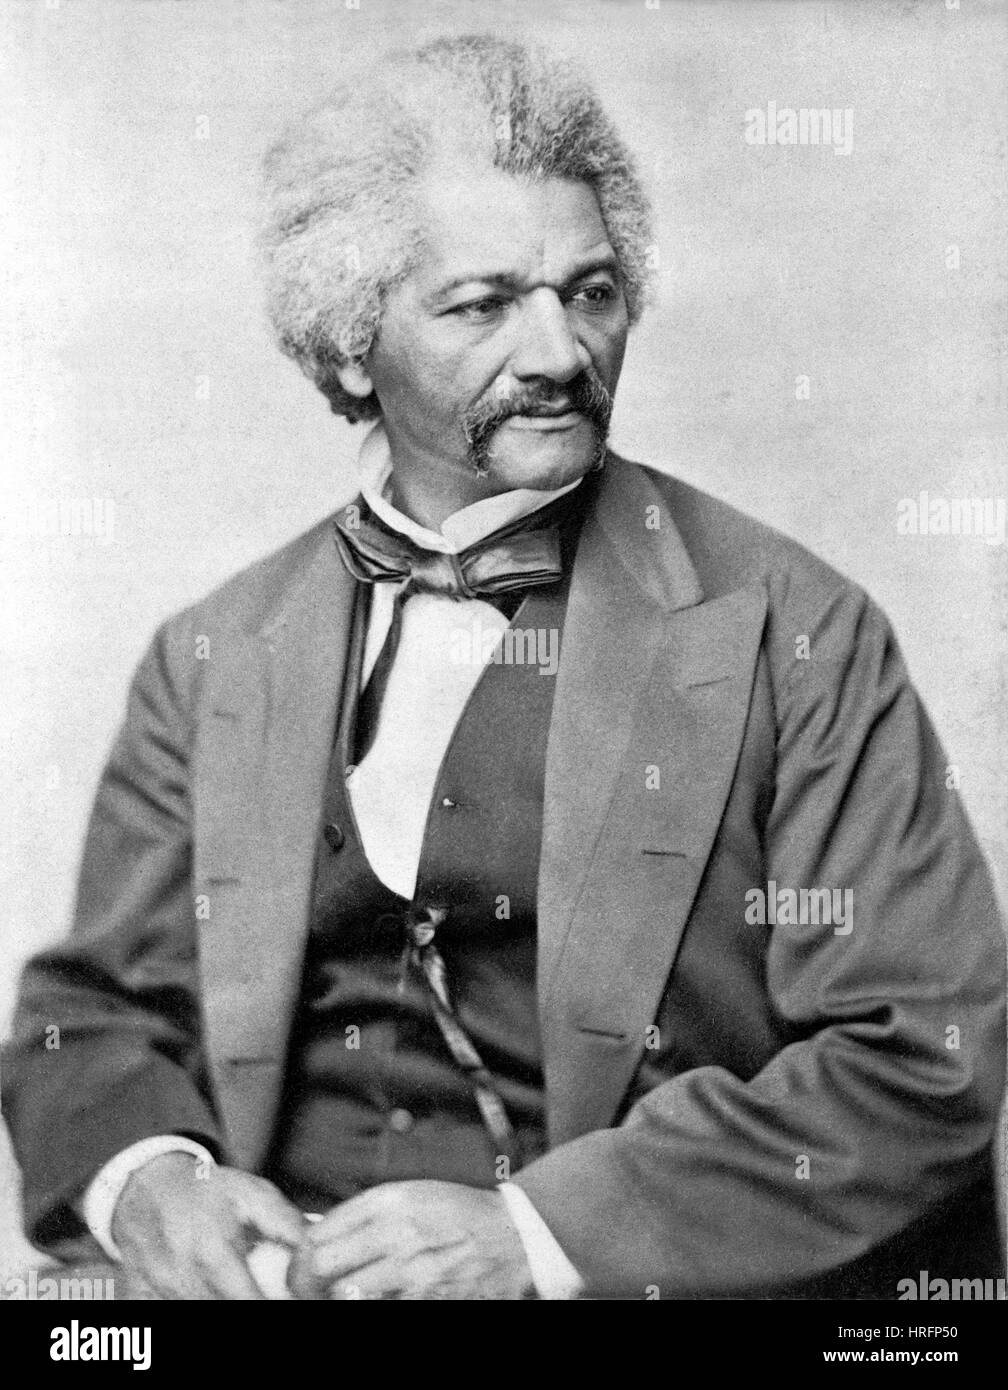 FREDERICK DOUGLASS (1818-1895) Afro-American politician and abolitionist about 1880 Stock Photo